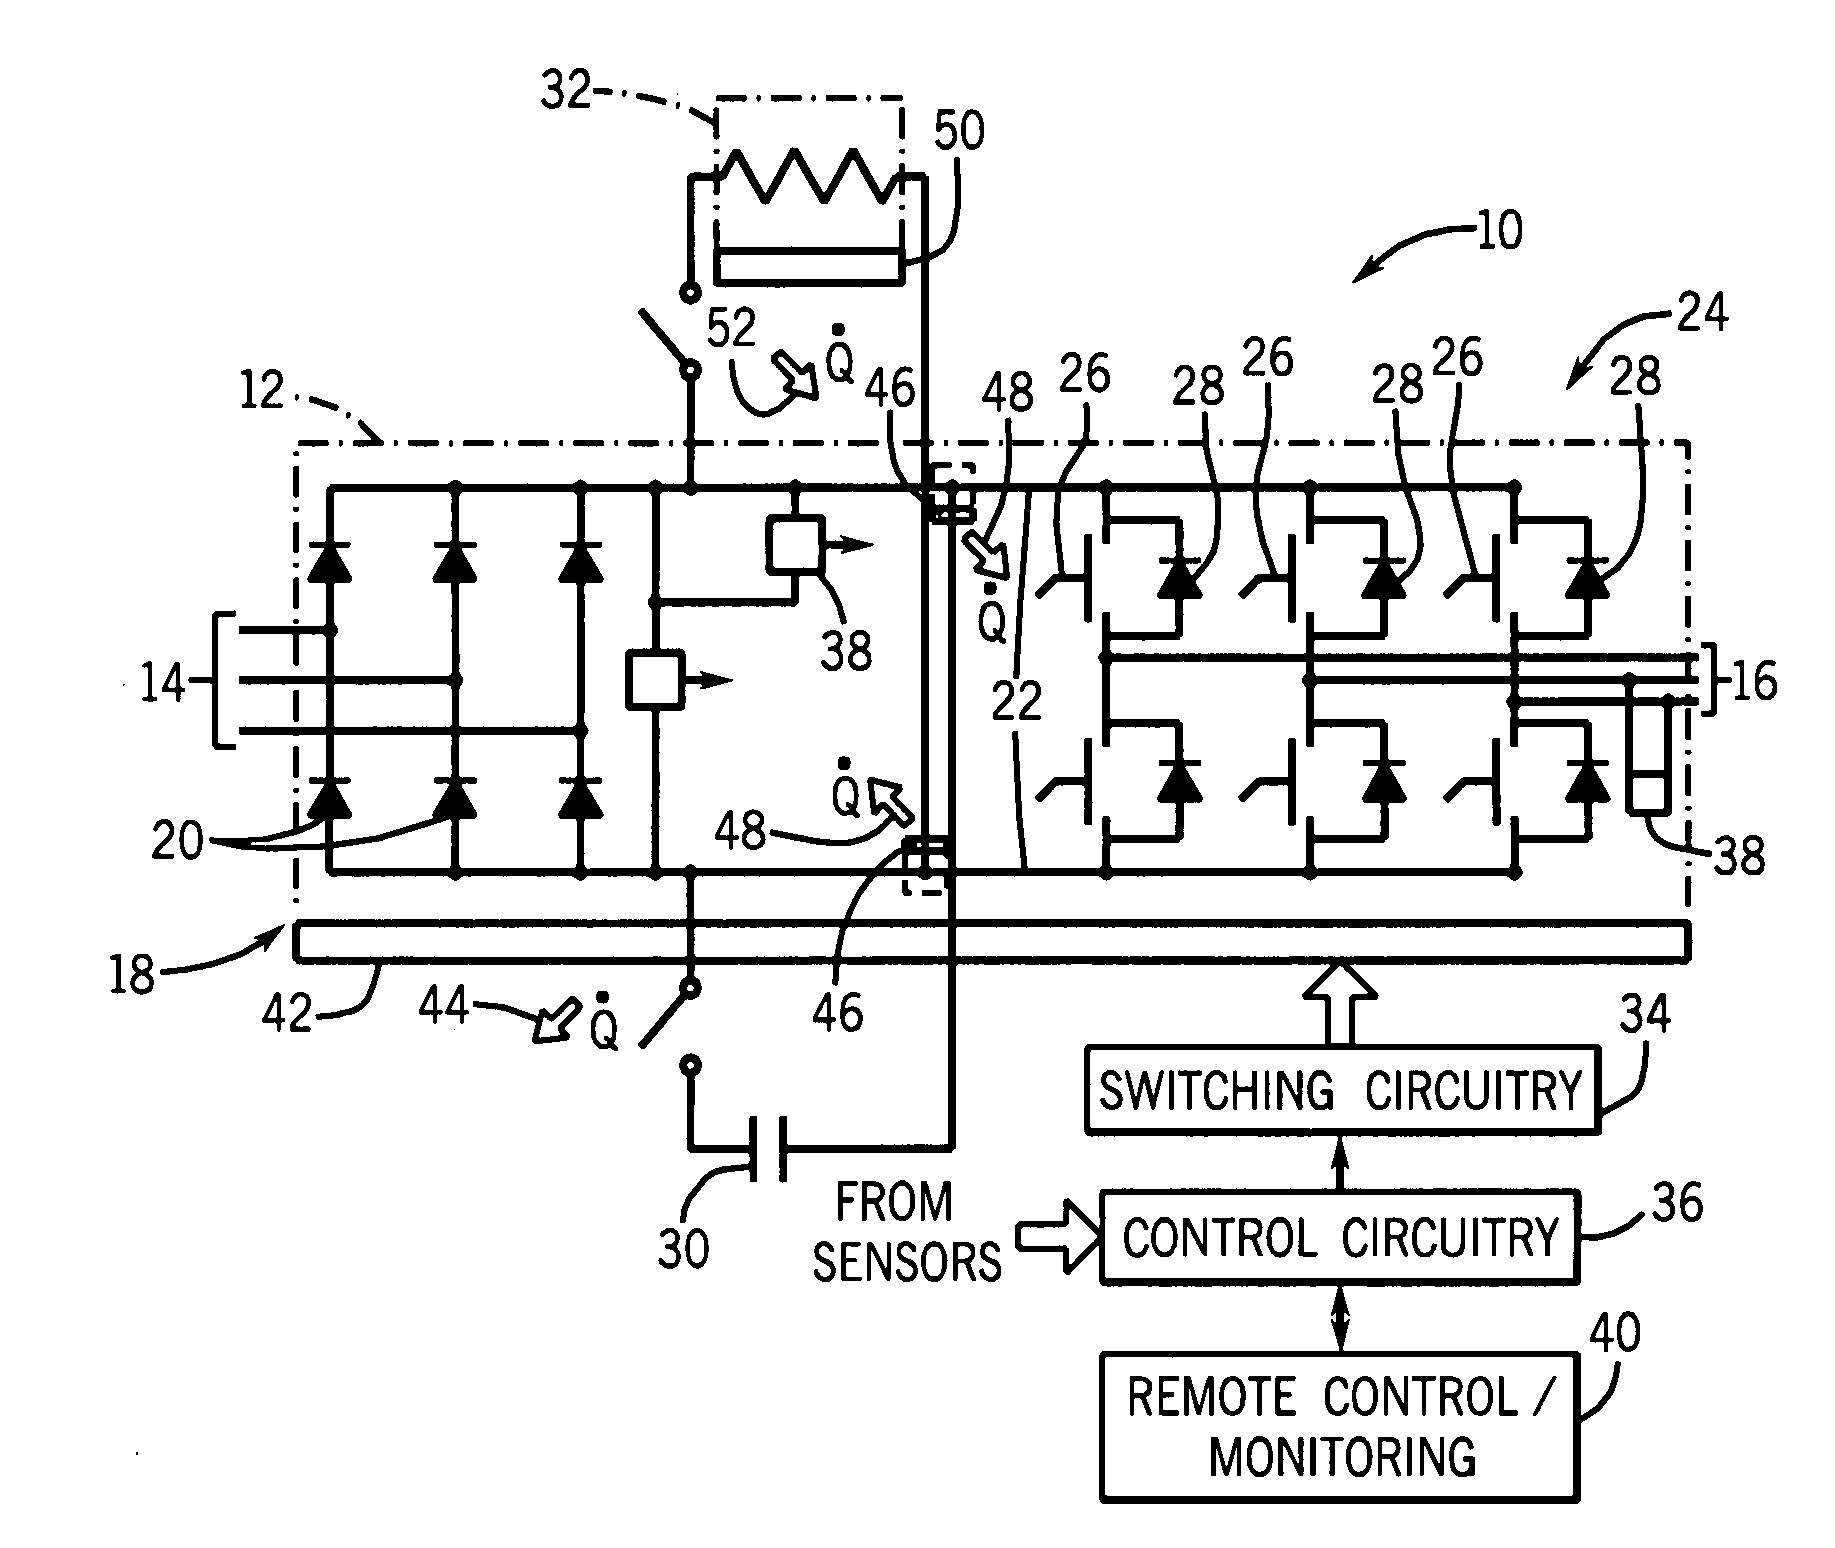 Phase change cooled electrical connections for power electronic devices